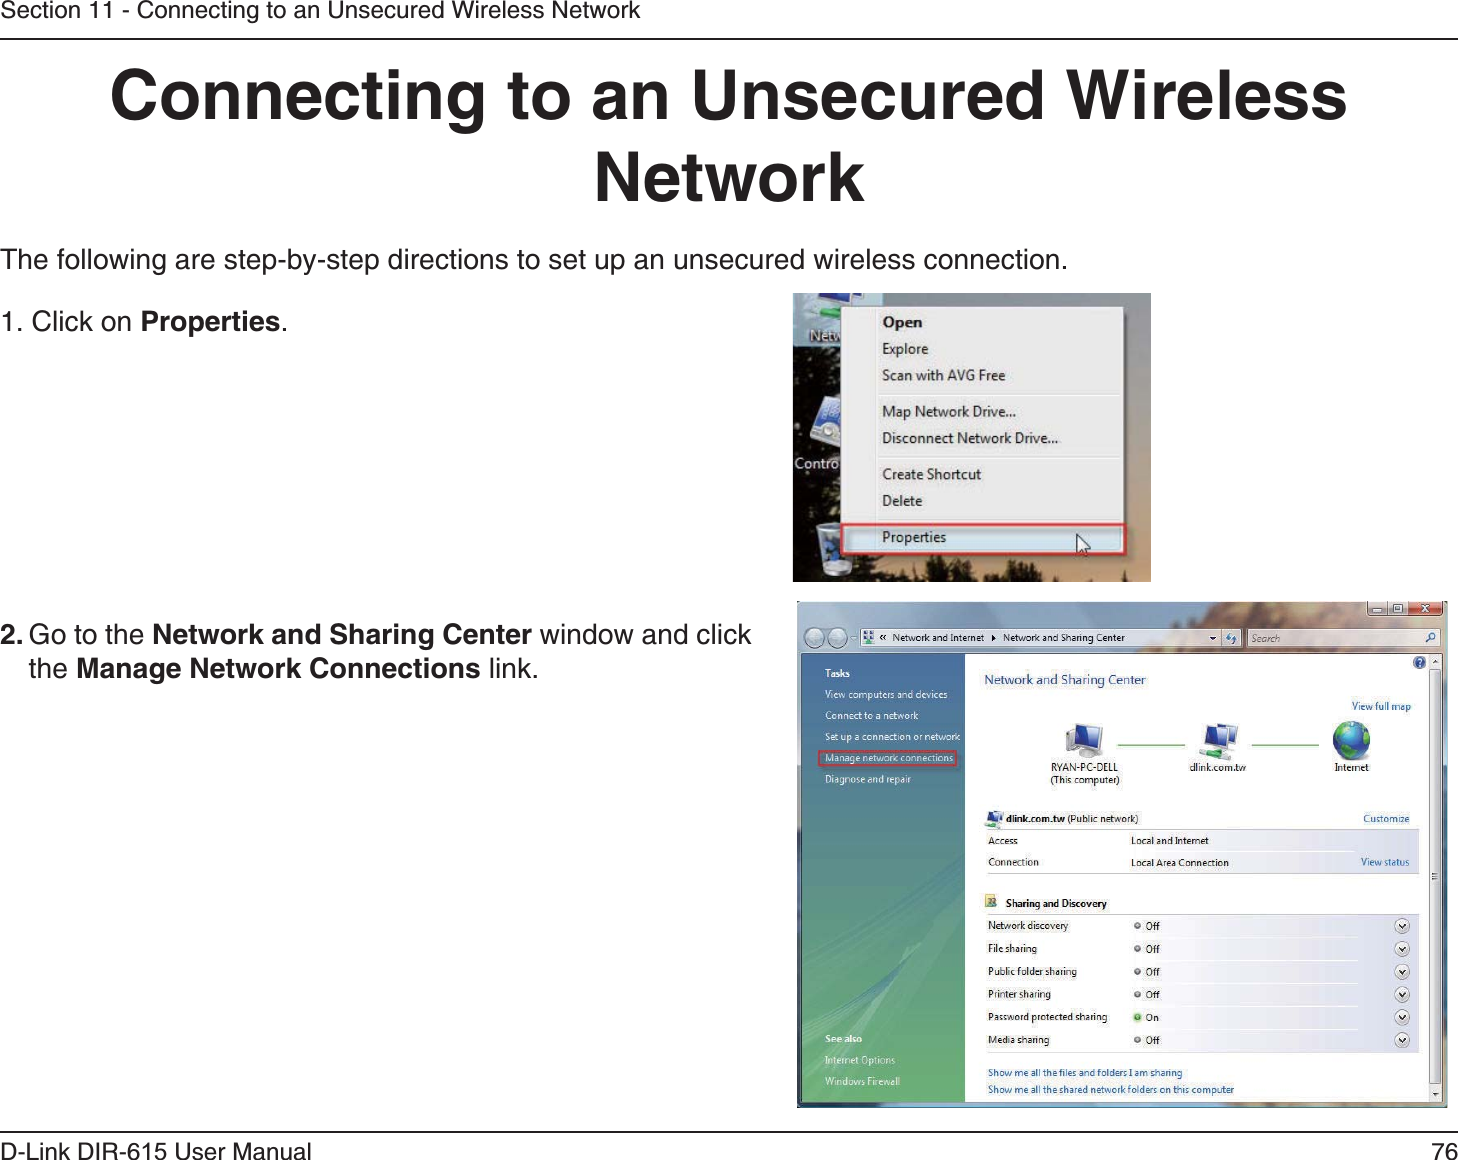 76D-Link DIR-6 User ManualSection 11 - Connecting to an Unsecured Wireless NetworkThe following are step-by-step directions to set up an unsecured wireless connection. Go to the  window and click the  link. 1. Click on .     